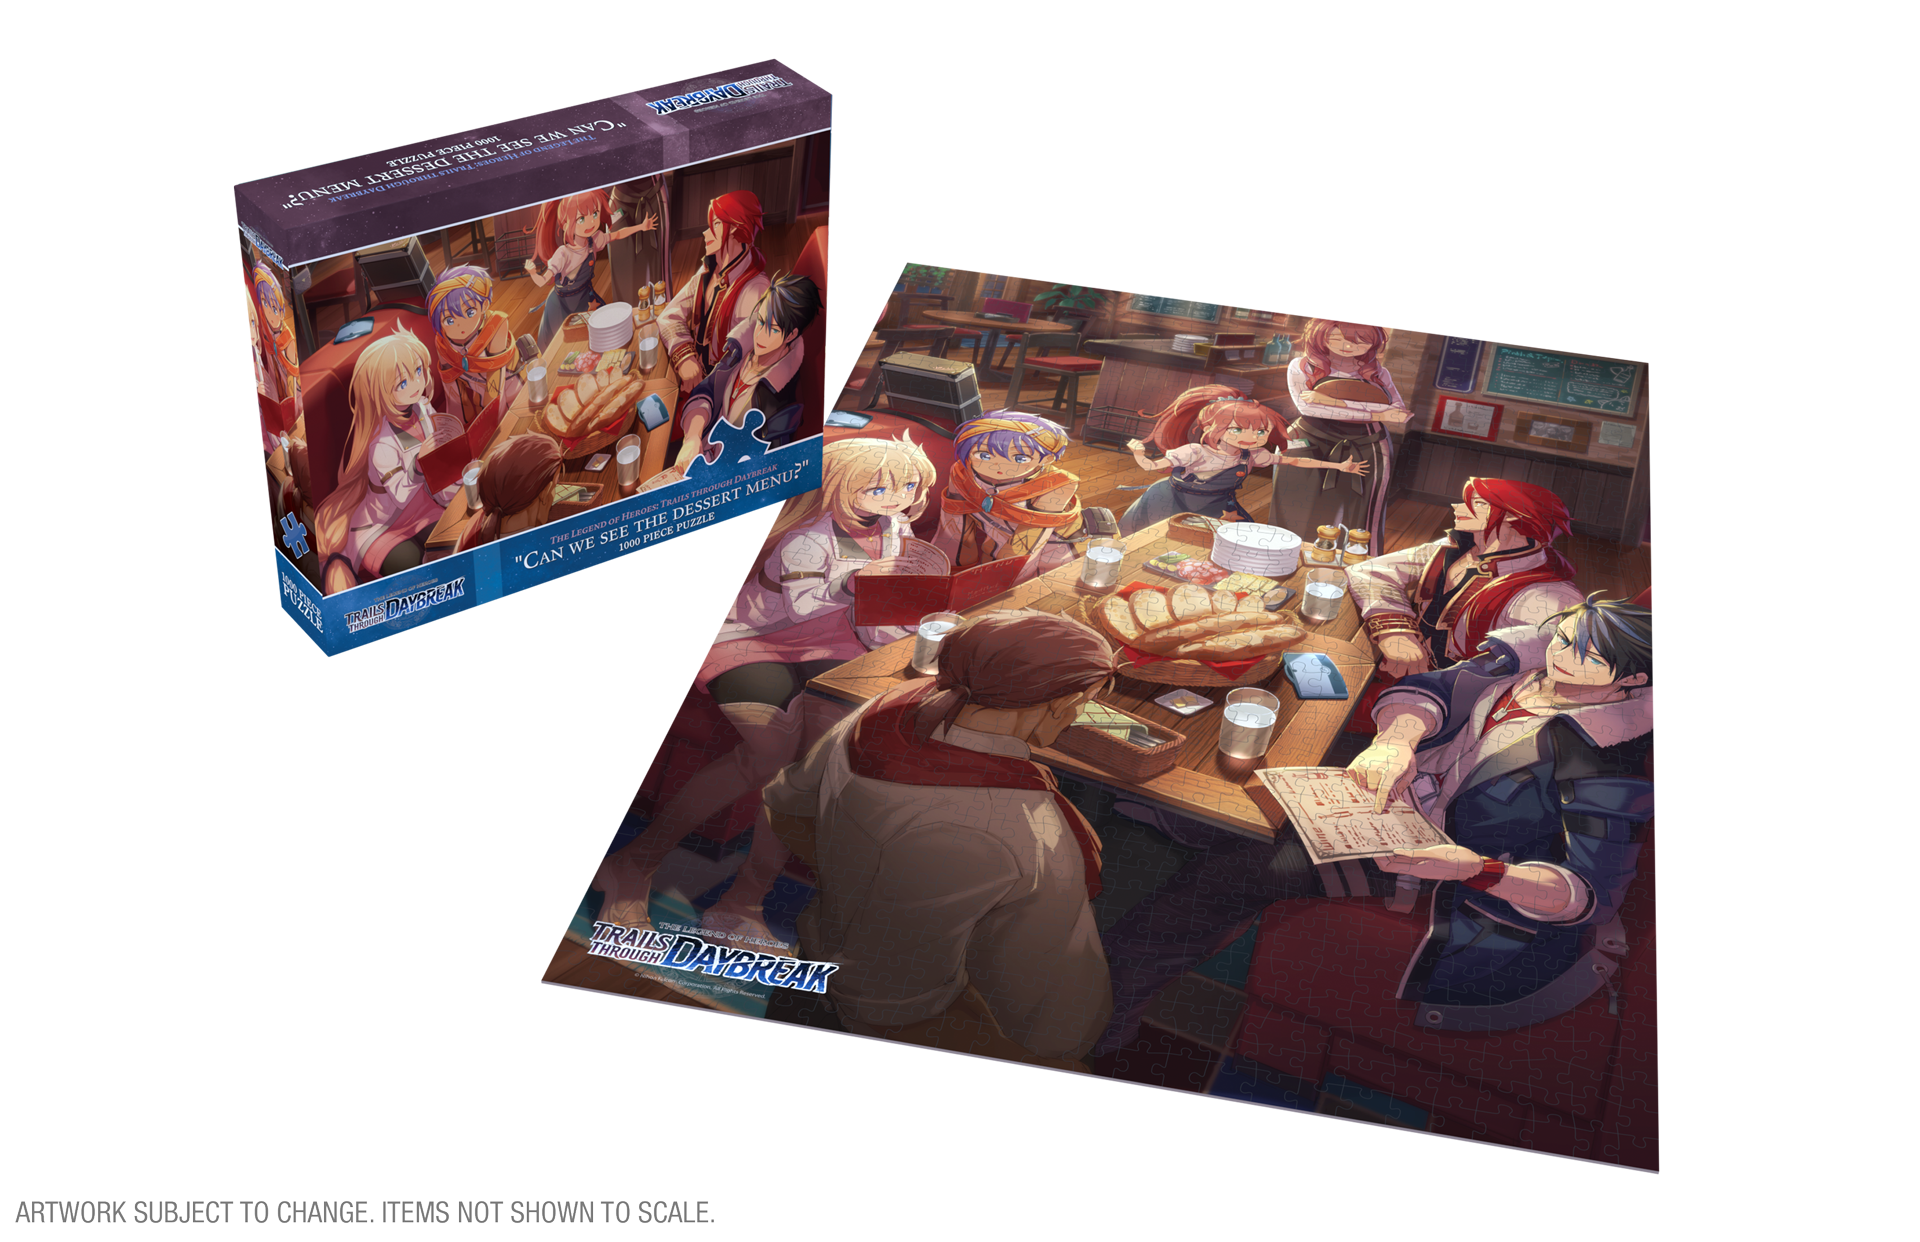 Trails through Daybreak: "Can we see the dessert menu?" 1000-piece puzzle